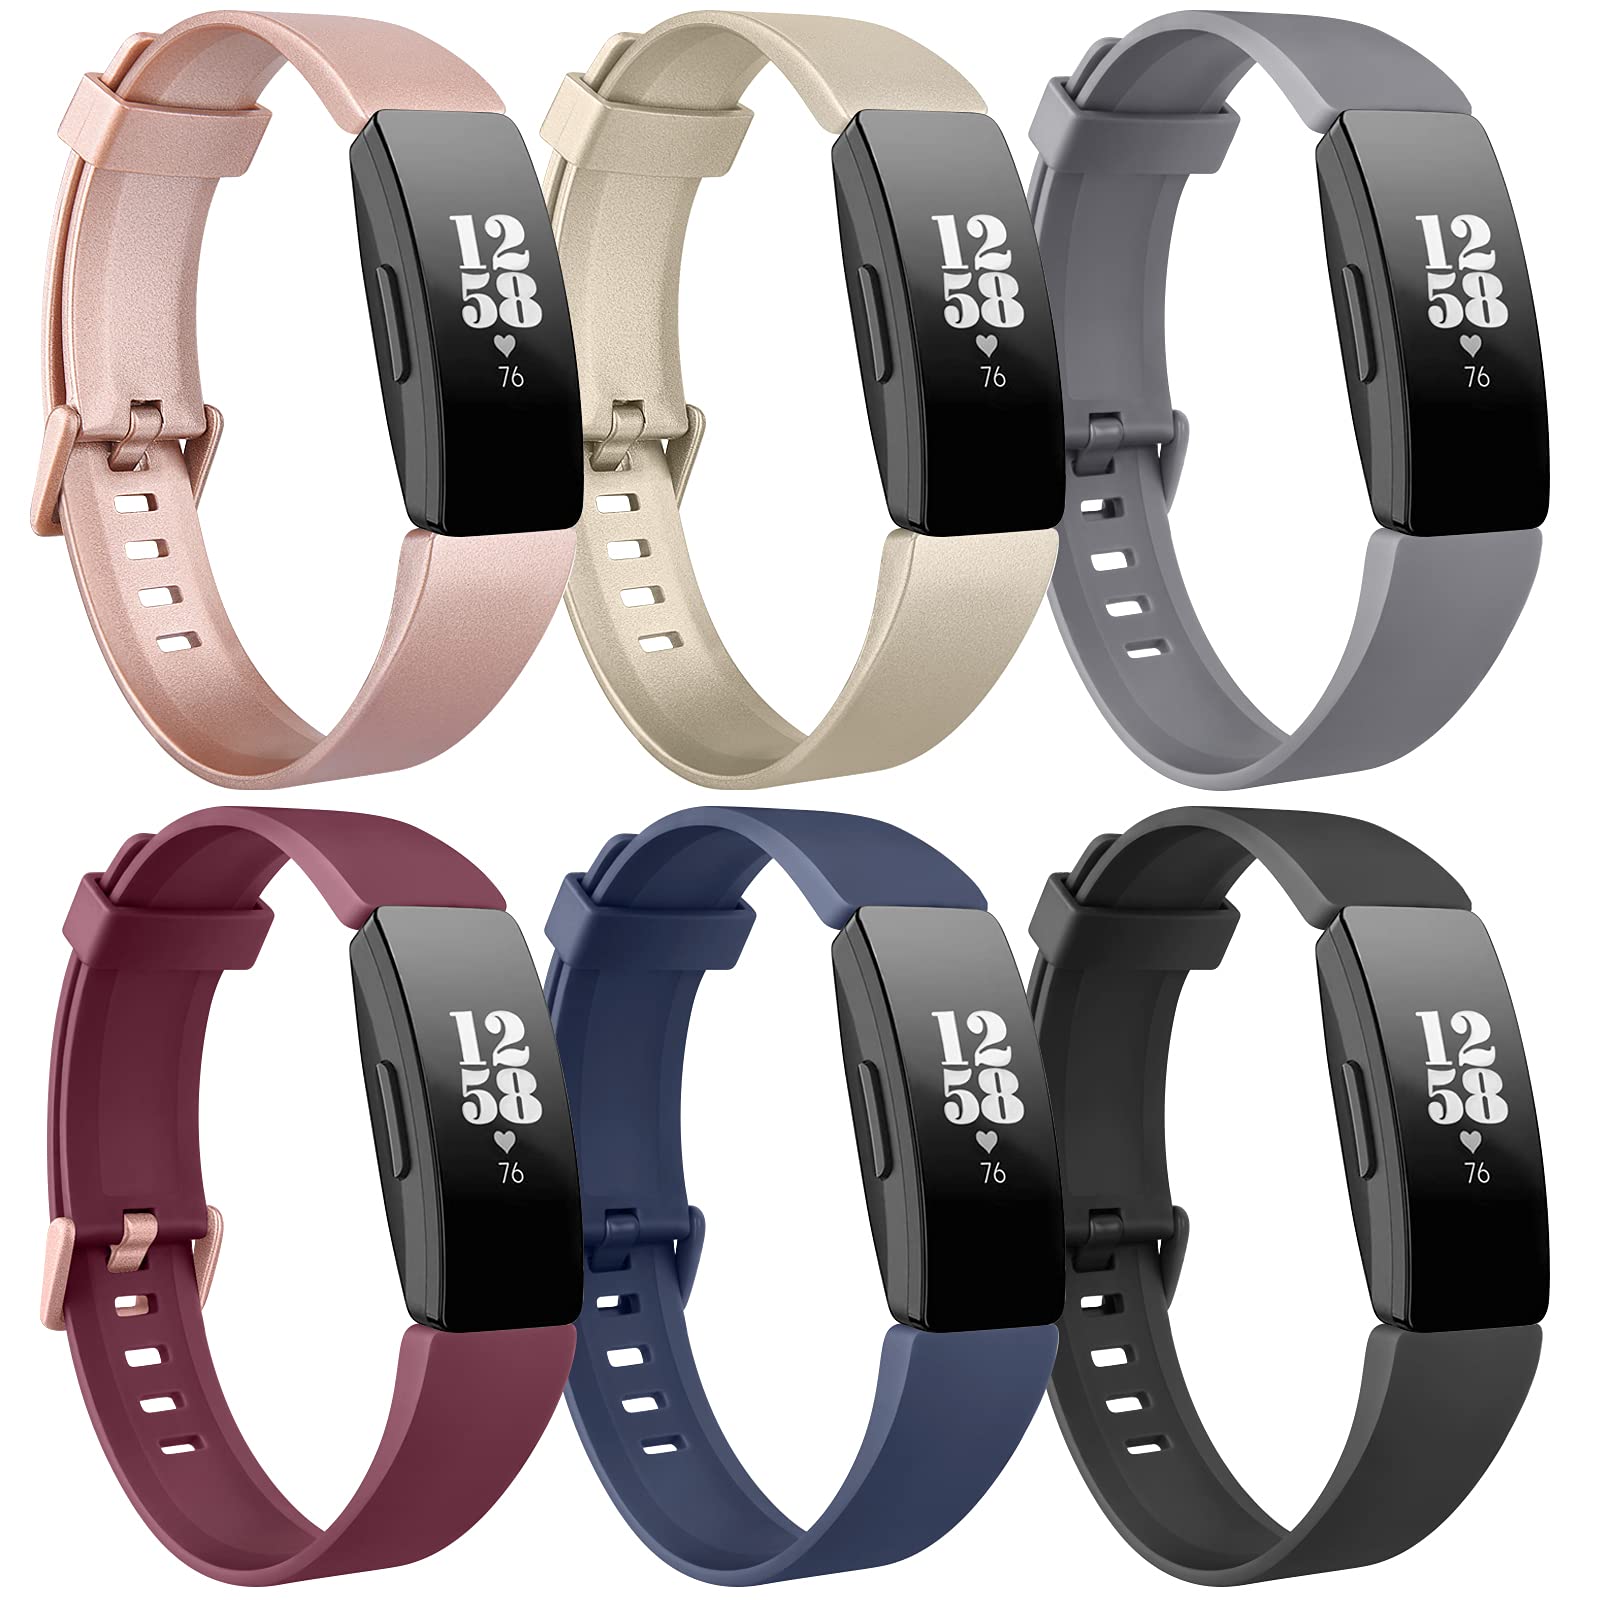 6 Pack] Bands Compatible with Fitbit Inspire HR & Fitbit Inspire 2 & Fitbit  Inspire & Fitbit Ace 2 Fitness Tracker for Women Men, Sport Silicone Bands  Replacement for Fitbit Inspire 2